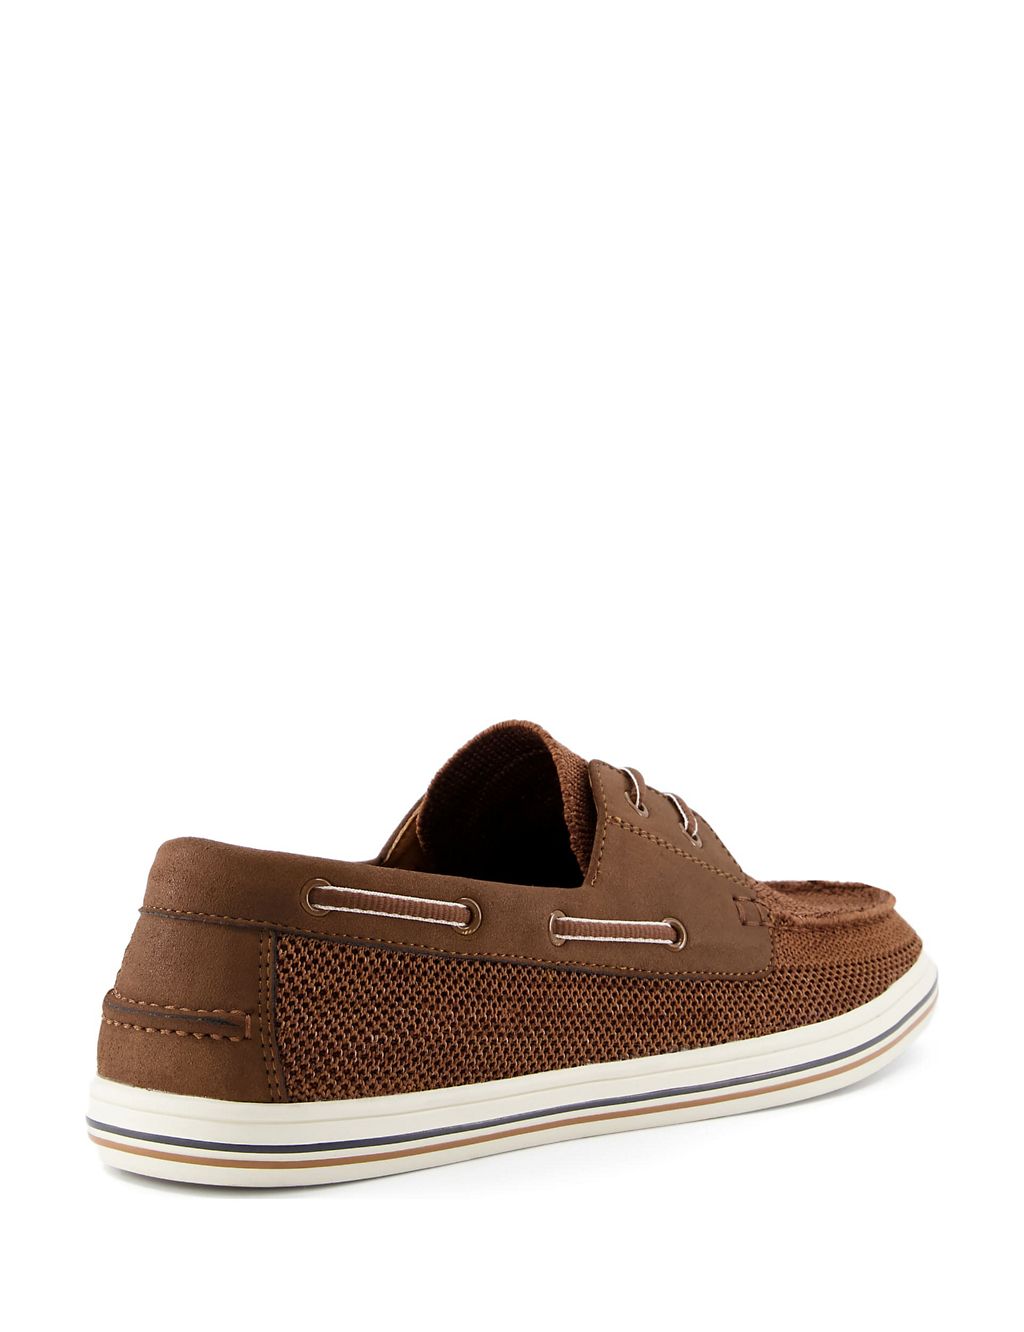 Lace Up Flat Boat Shoes 2 of 4